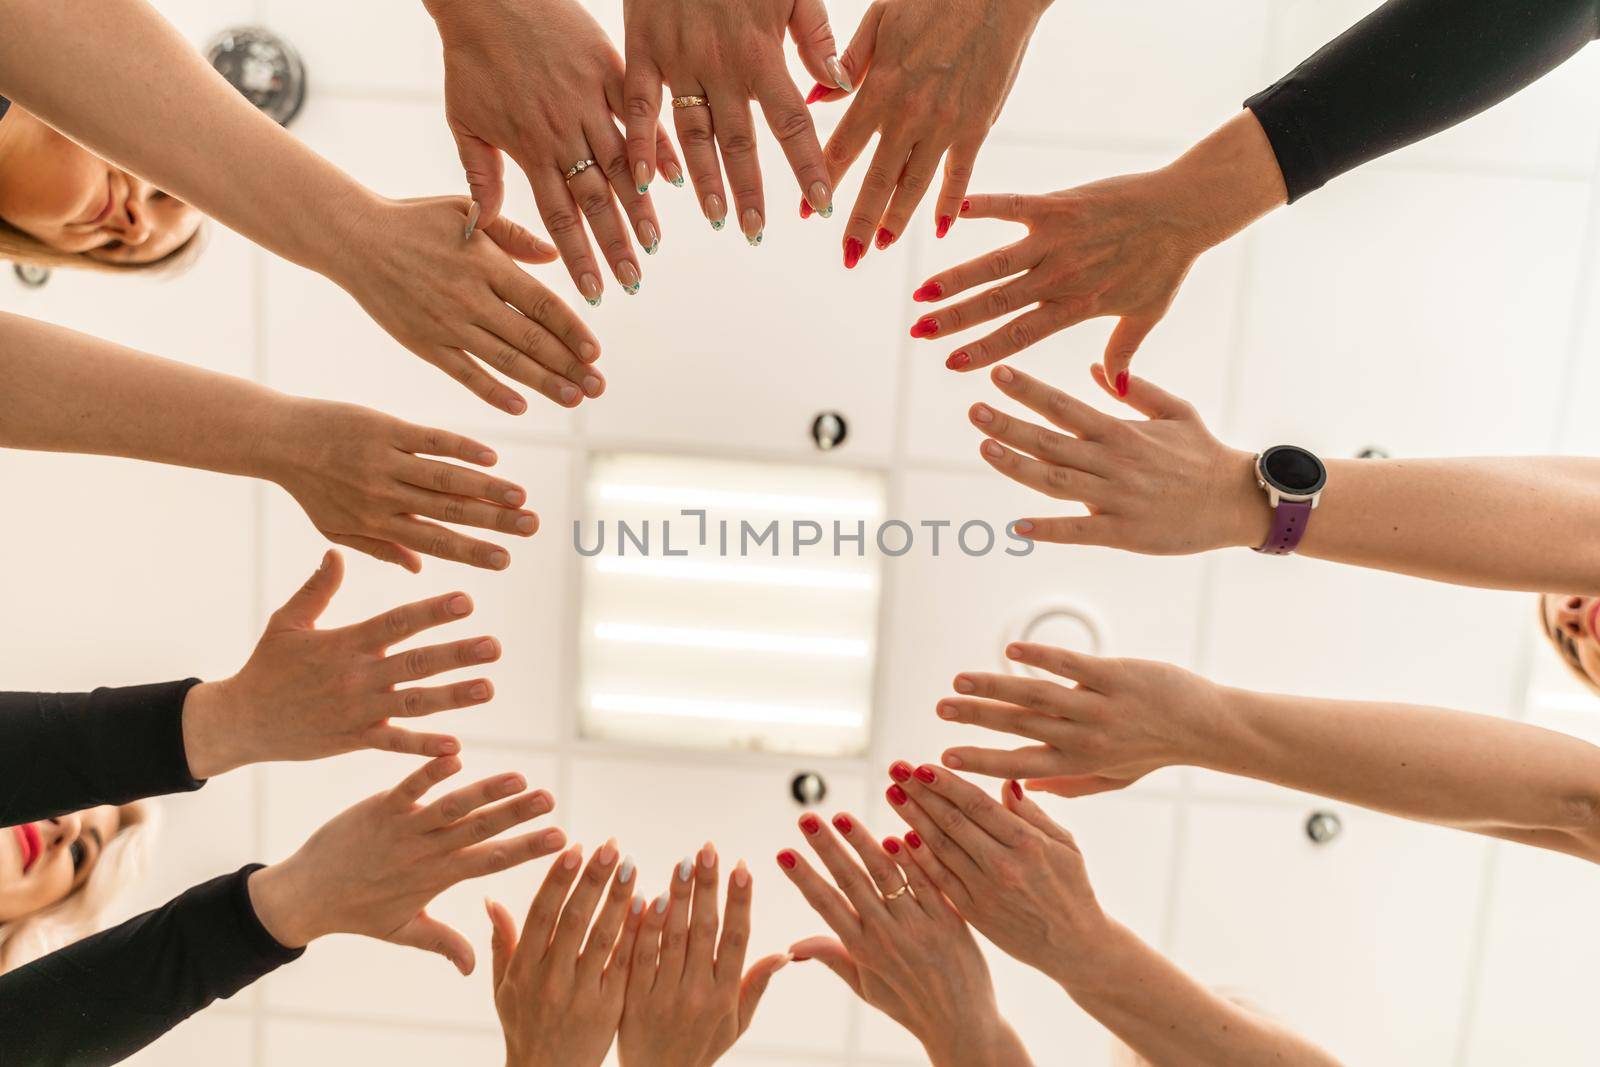 Team of people holding hands. Group of happy young women holding hands. Bottom view, low angle shot of human hands. Friendship and unity concept.